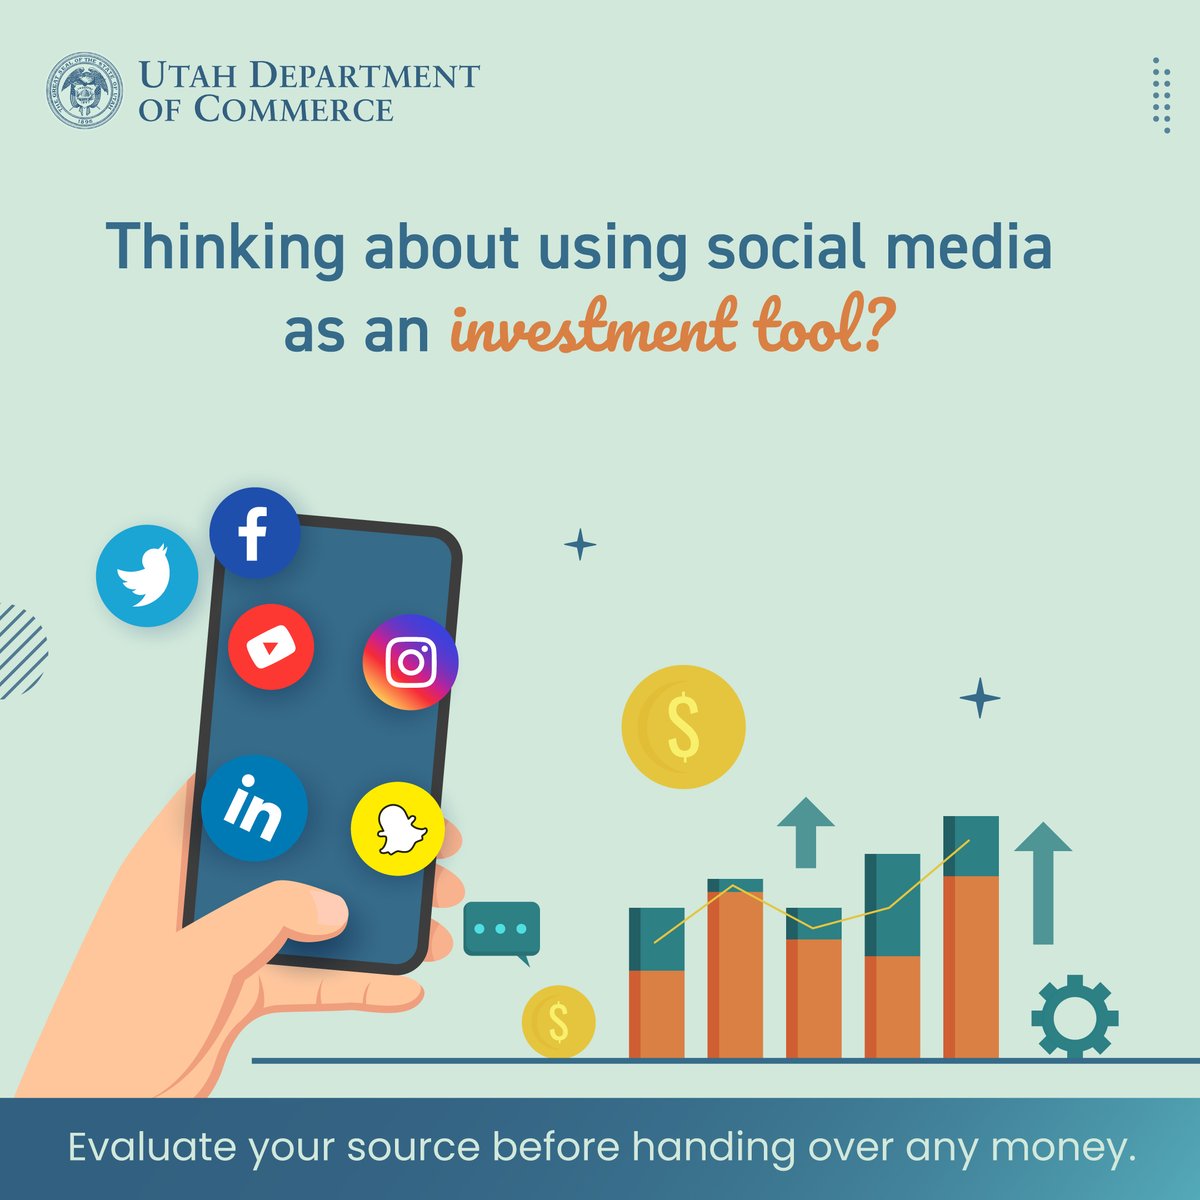 If you’re using social media as an investment tool, here are four things to do before handing over your money: 1. Evaluate your source. 2. Check your emotions at the door.  3. Know the rules and the risks. 4. Watch your wallet. Learn more: finra.org/investors/insi…